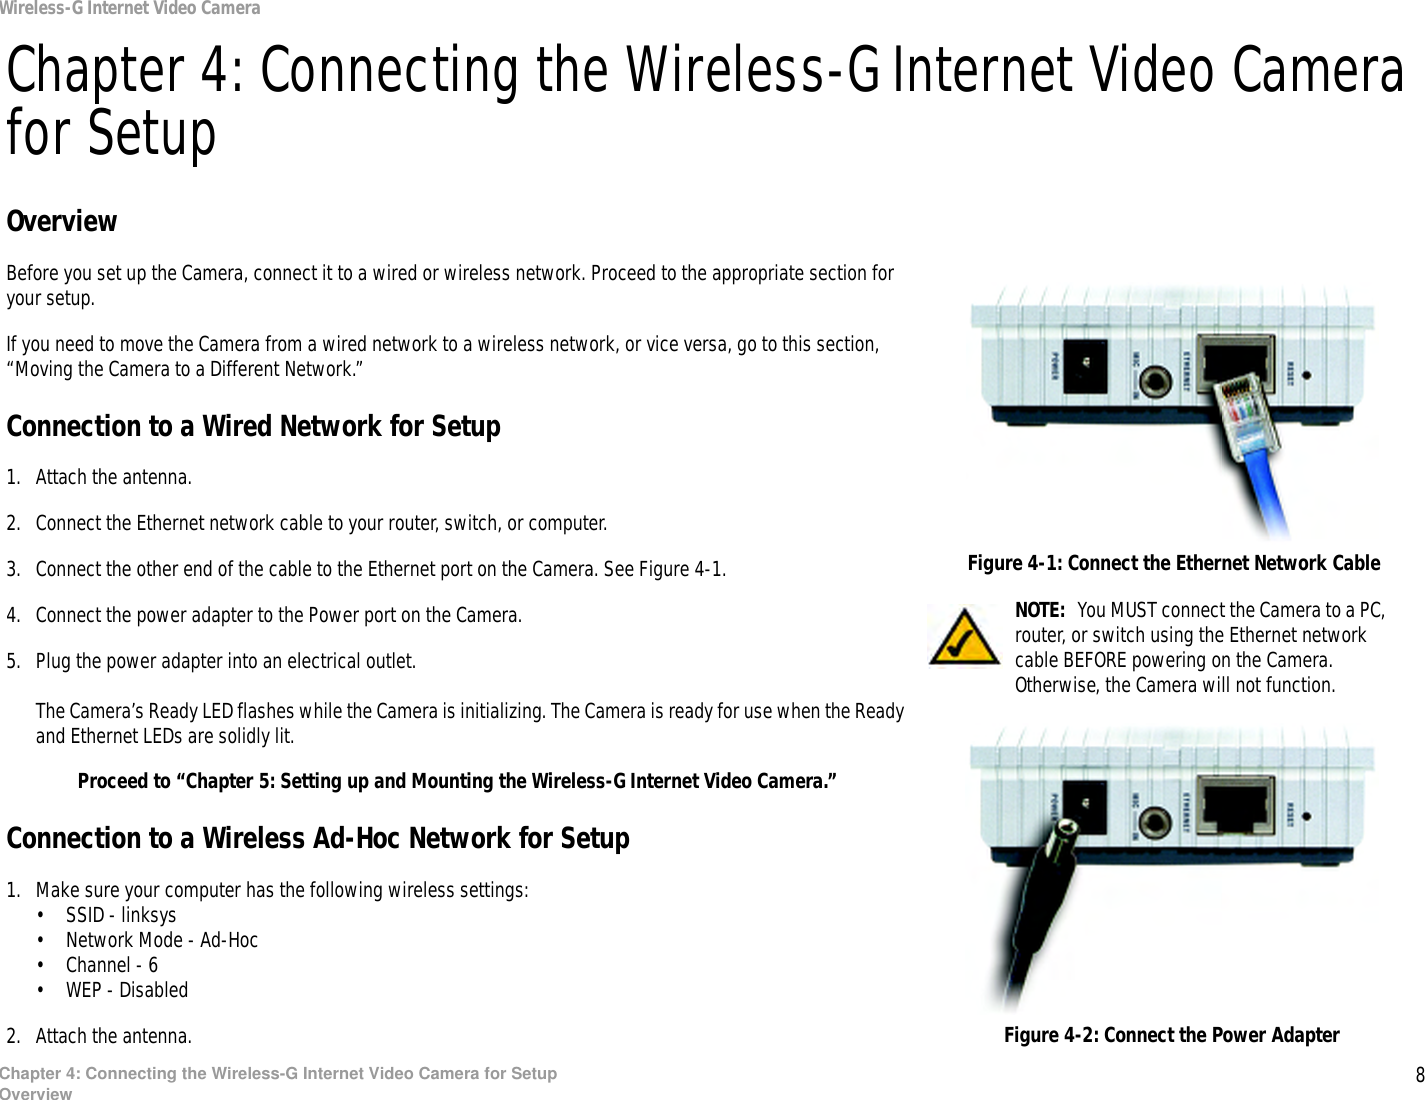 8Chapter 4: Connecting the Wireless-G Internet Video Camera for SetupOverviewWireless-G Internet Video CameraChapter 4: Connecting the Wireless-G Internet Video Camera for SetupOverviewBefore you set up the Camera, connect it to a wired or wireless network. Proceed to the appropriate section for your setup.If you need to move the Camera from a wired network to a wireless network, or vice versa, go to this section, “Moving the Camera to a Different Network.”Connection to a Wired Network for Setup1. Attach the antenna.2. Connect the Ethernet network cable to your router, switch, or computer.3. Connect the other end of the cable to the Ethernet port on the Camera. See Figure 4-1.4. Connect the power adapter to the Power port on the Camera.5. Plug the power adapter into an electrical outlet.The Camera’s Ready LED flashes while the Camera is initializing. The Camera is ready for use when the Ready and Ethernet LEDs are solidly lit.Proceed to “Chapter 5: Setting up and Mounting the Wireless-G Internet Video Camera.”Connection to a Wireless Ad-Hoc Network for Setup1. Make sure your computer has the following wireless settings:• SSID - linksys• Network Mode - Ad-Hoc• Channel - 6• WEP - Disabled2. Attach the antenna.NOTE:  You MUST connect the Camera to a PC, router, or switch using the Ethernet network cable BEFORE powering on the Camera. Otherwise, the Camera will not function.Figure 4-2: Connect the Power AdapterFigure 4-1: Connect the Ethernet Network Cable